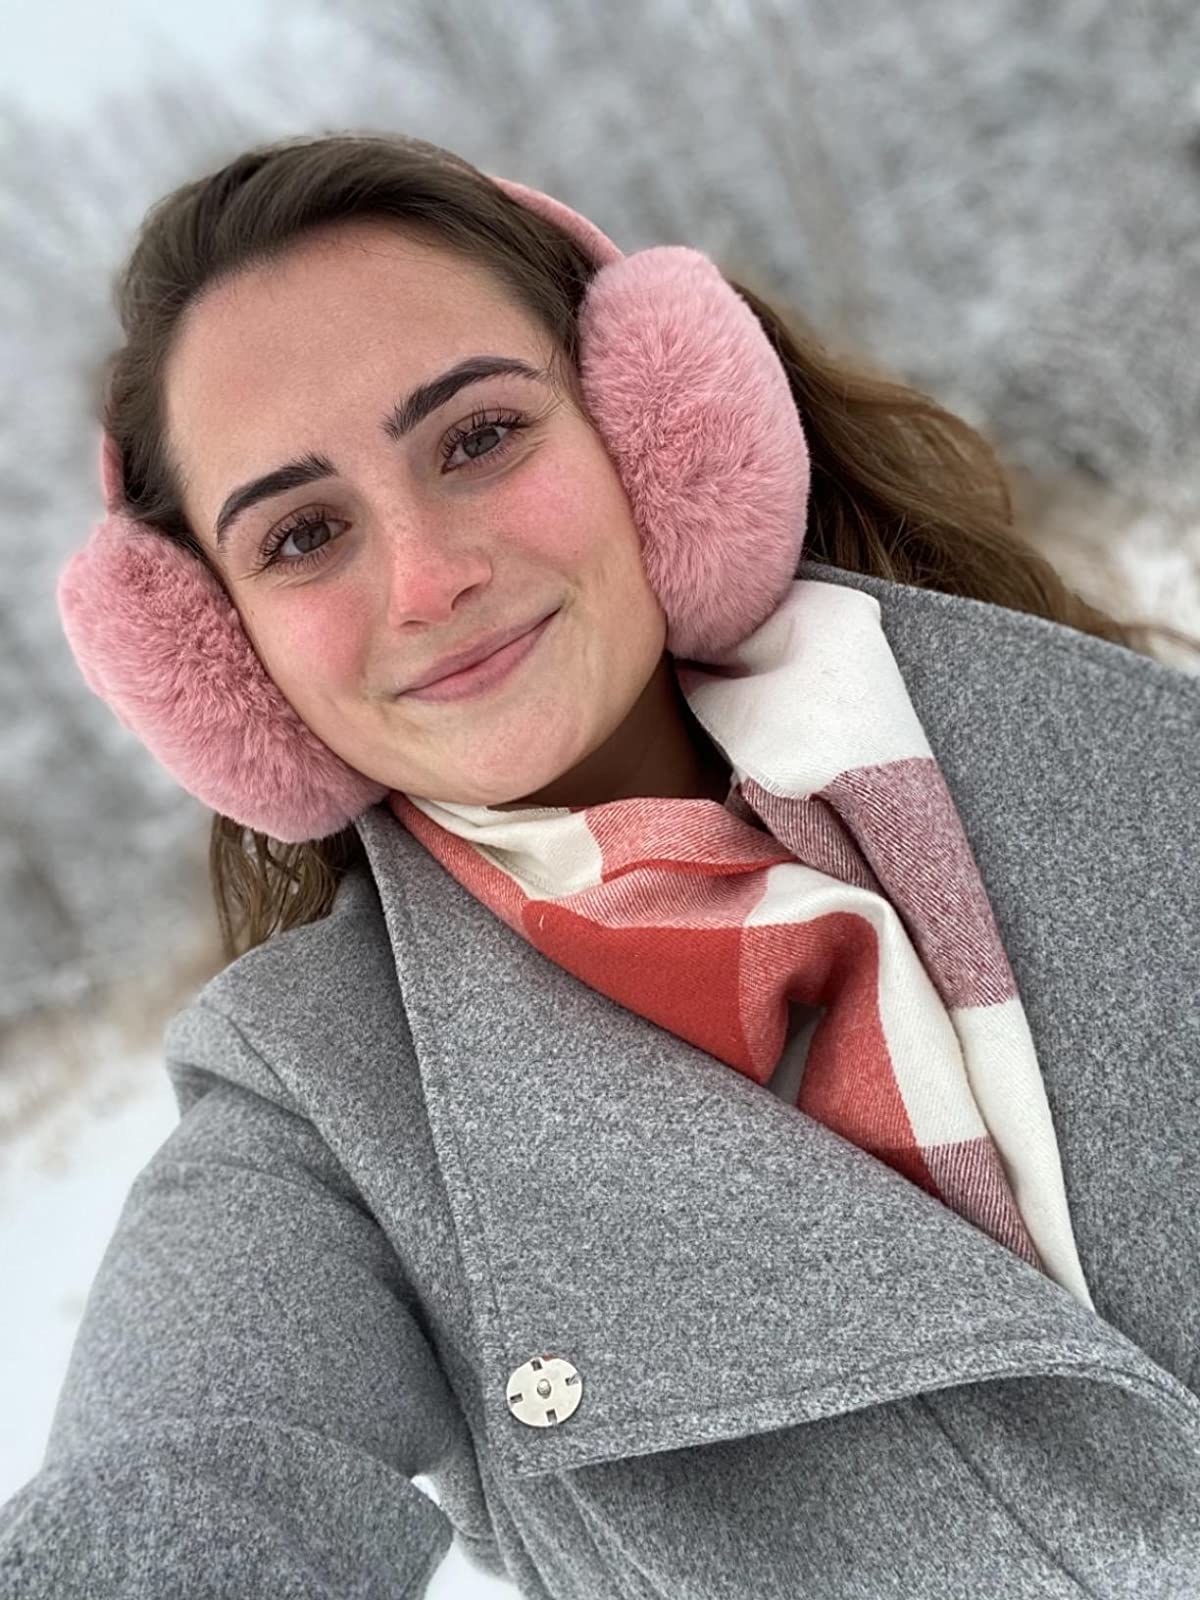 Reviewer is wearing the fluffy pink ear muffs outside